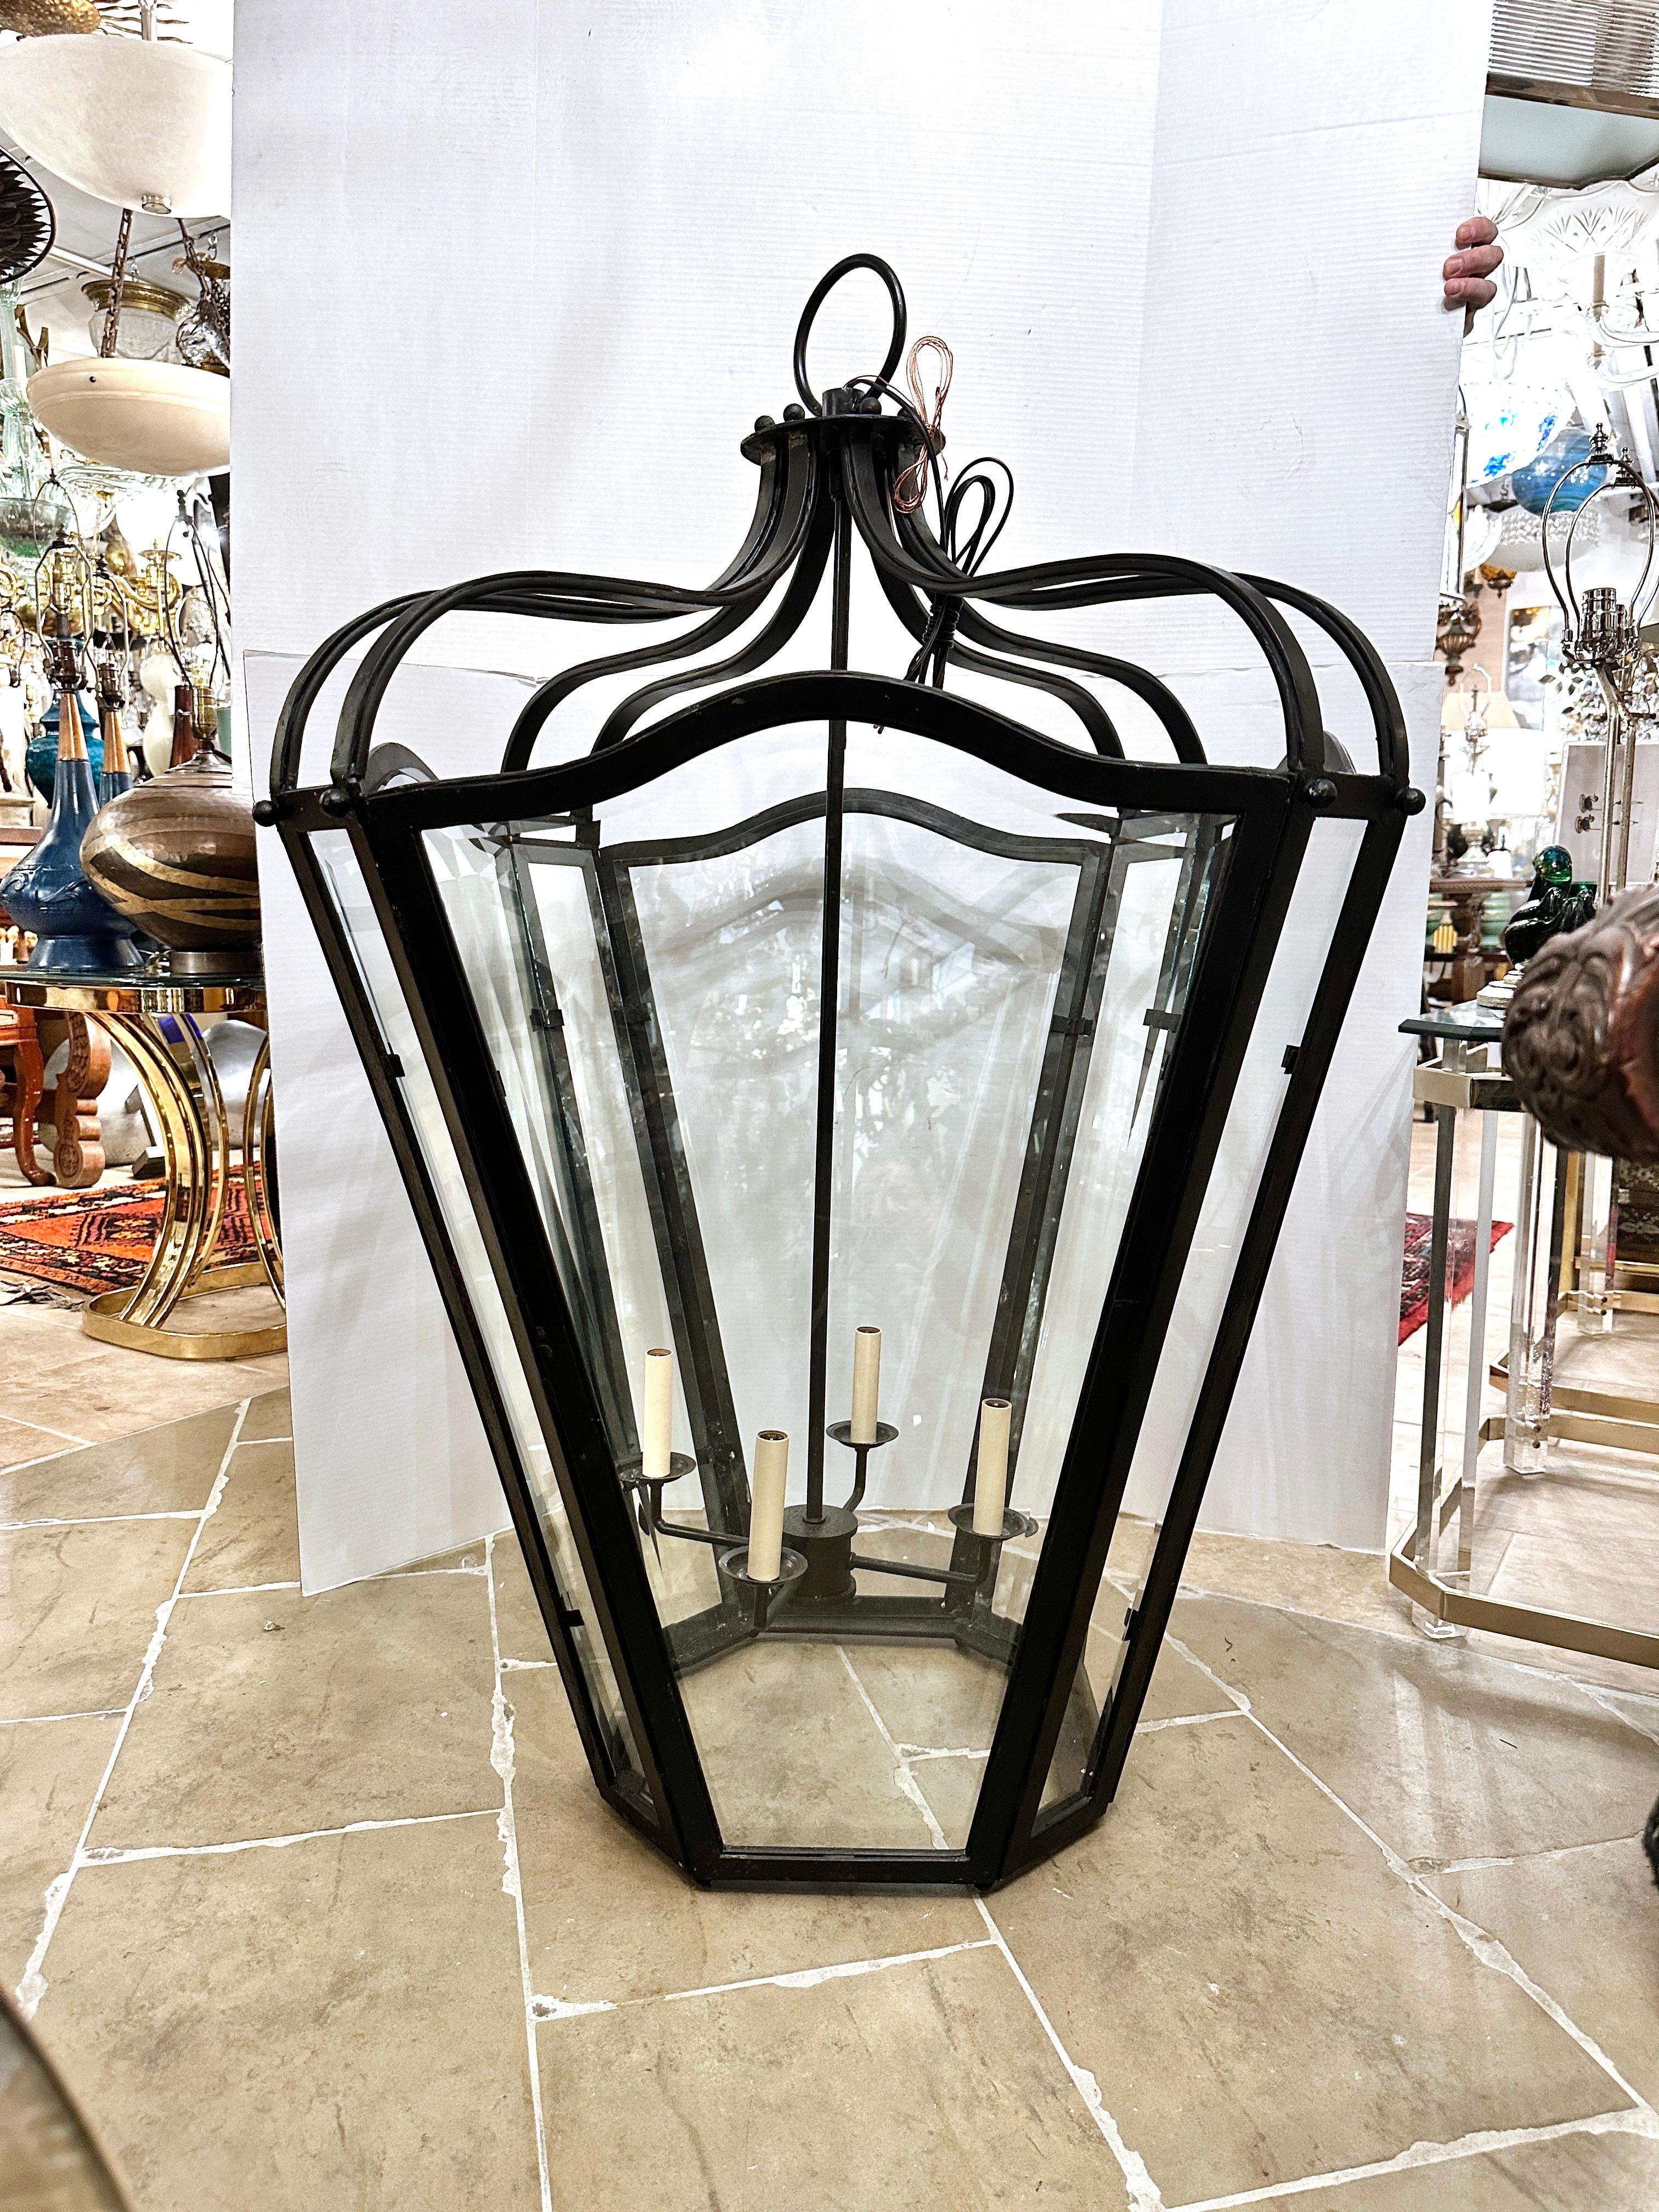 A circa 1950's French wrought iron lantern with beveled glass panels.

Measurements:
Height of body: 46